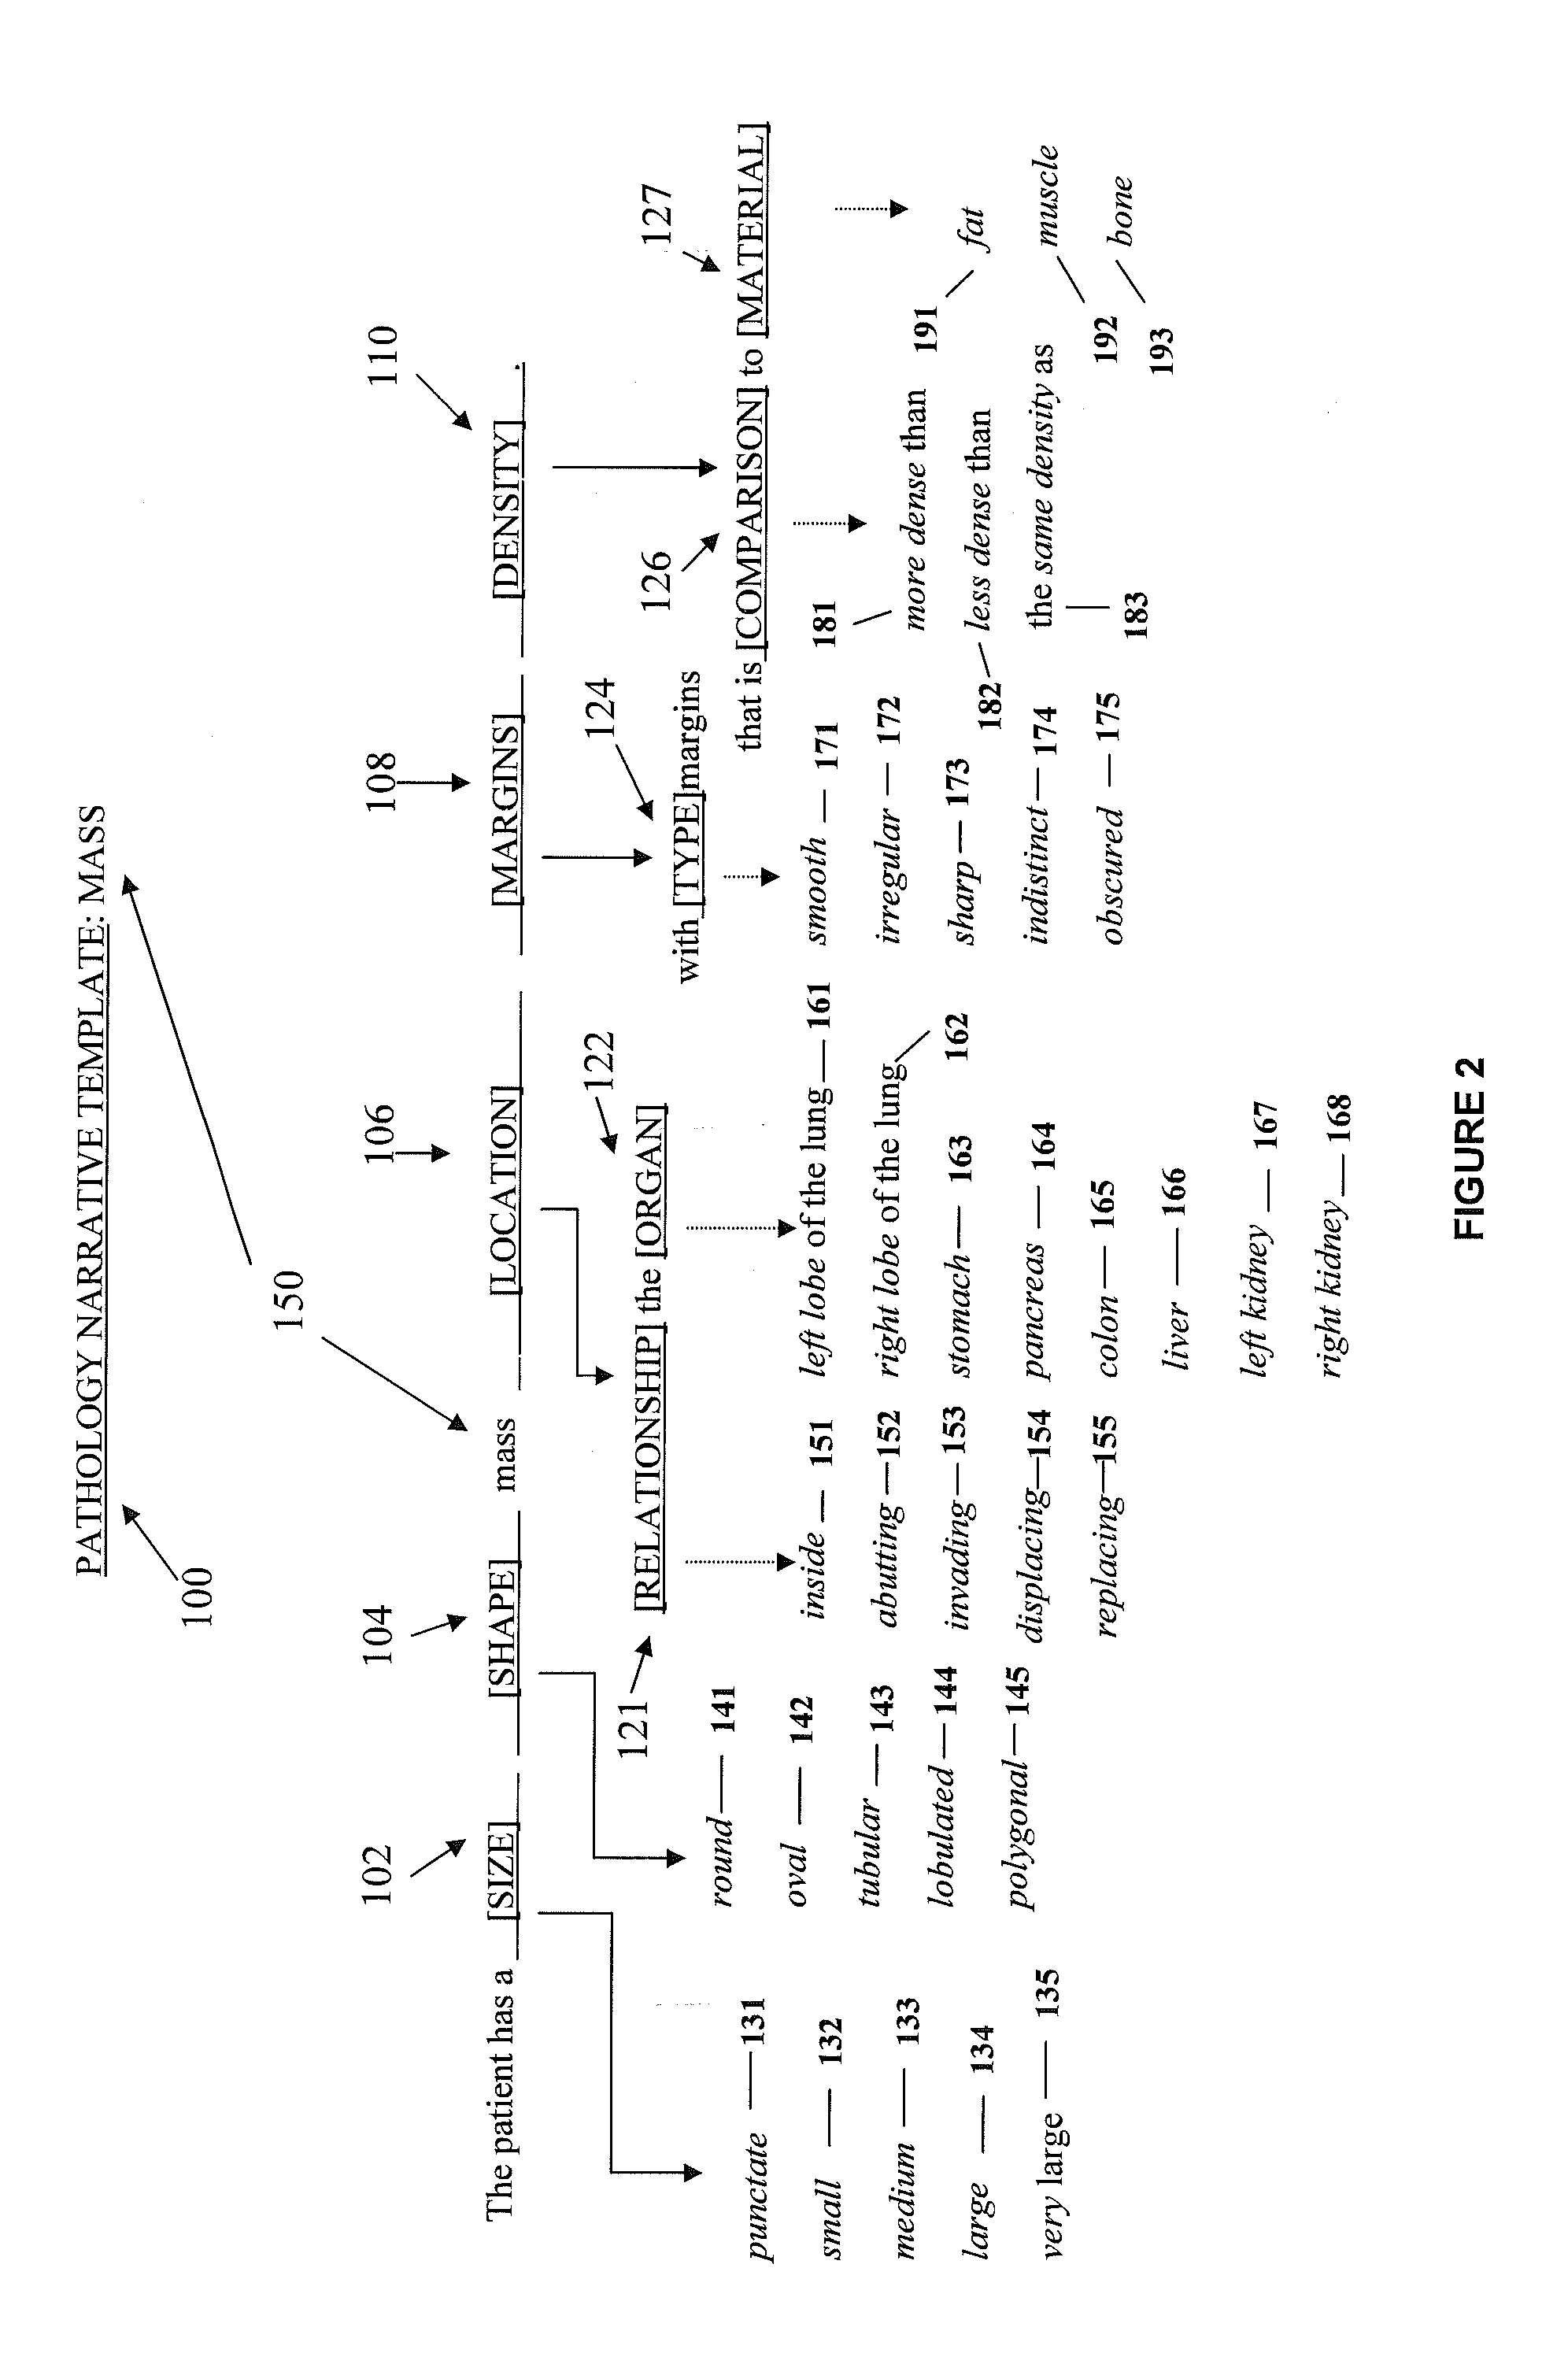 System and methods for matching an utterance to a template hierarchy